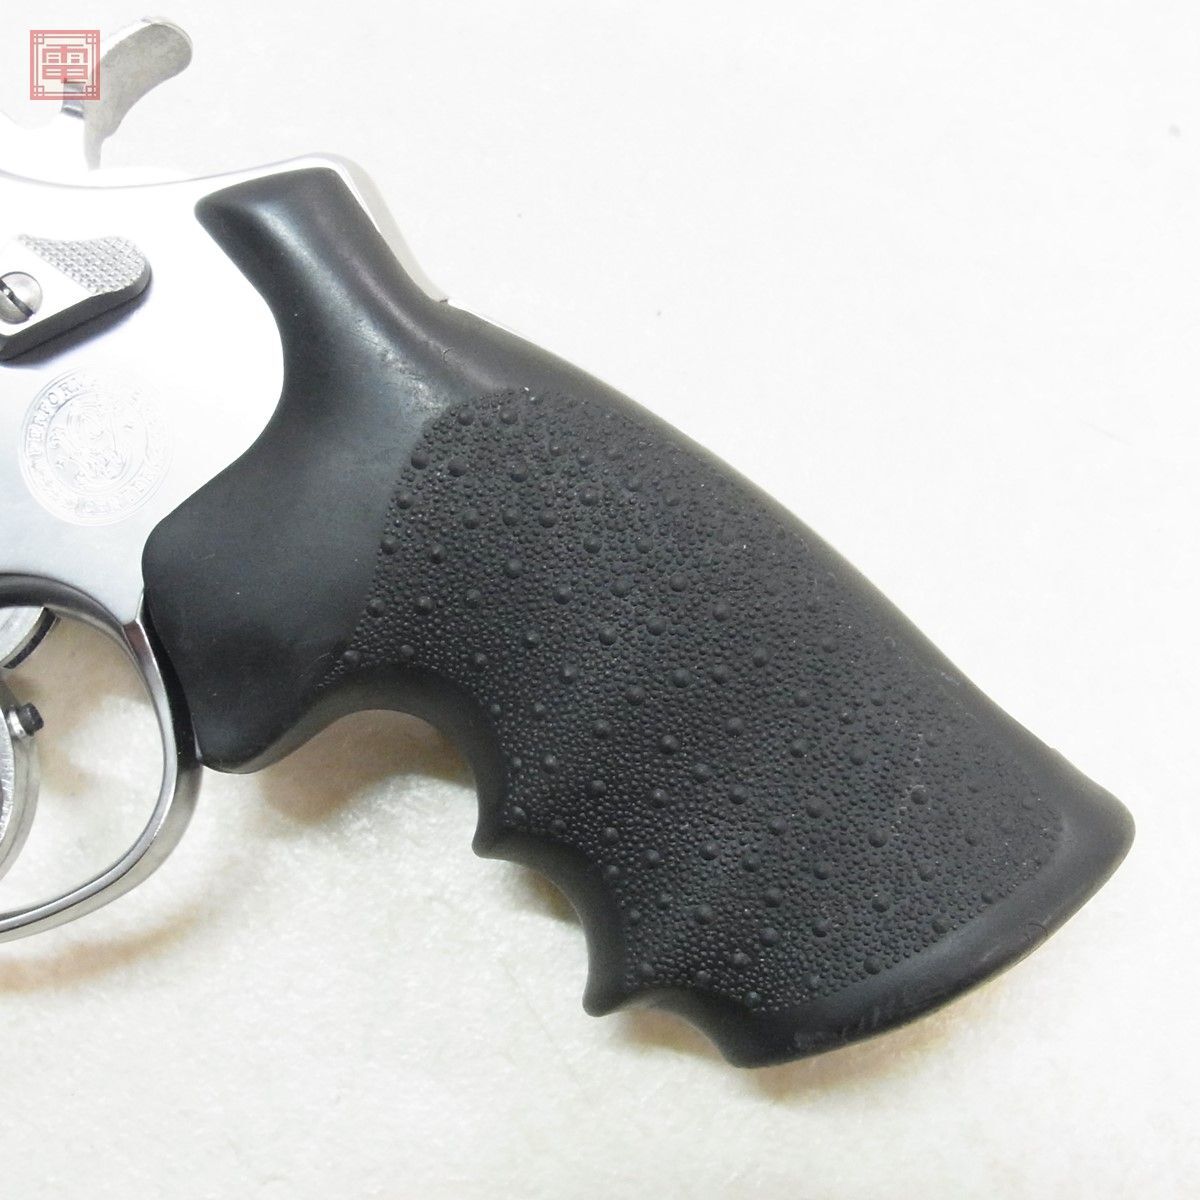 tanaka model gun S&W M629 Target Hunter Ver.2 6 -inch stainless steel ABS SPG present condition goods [20